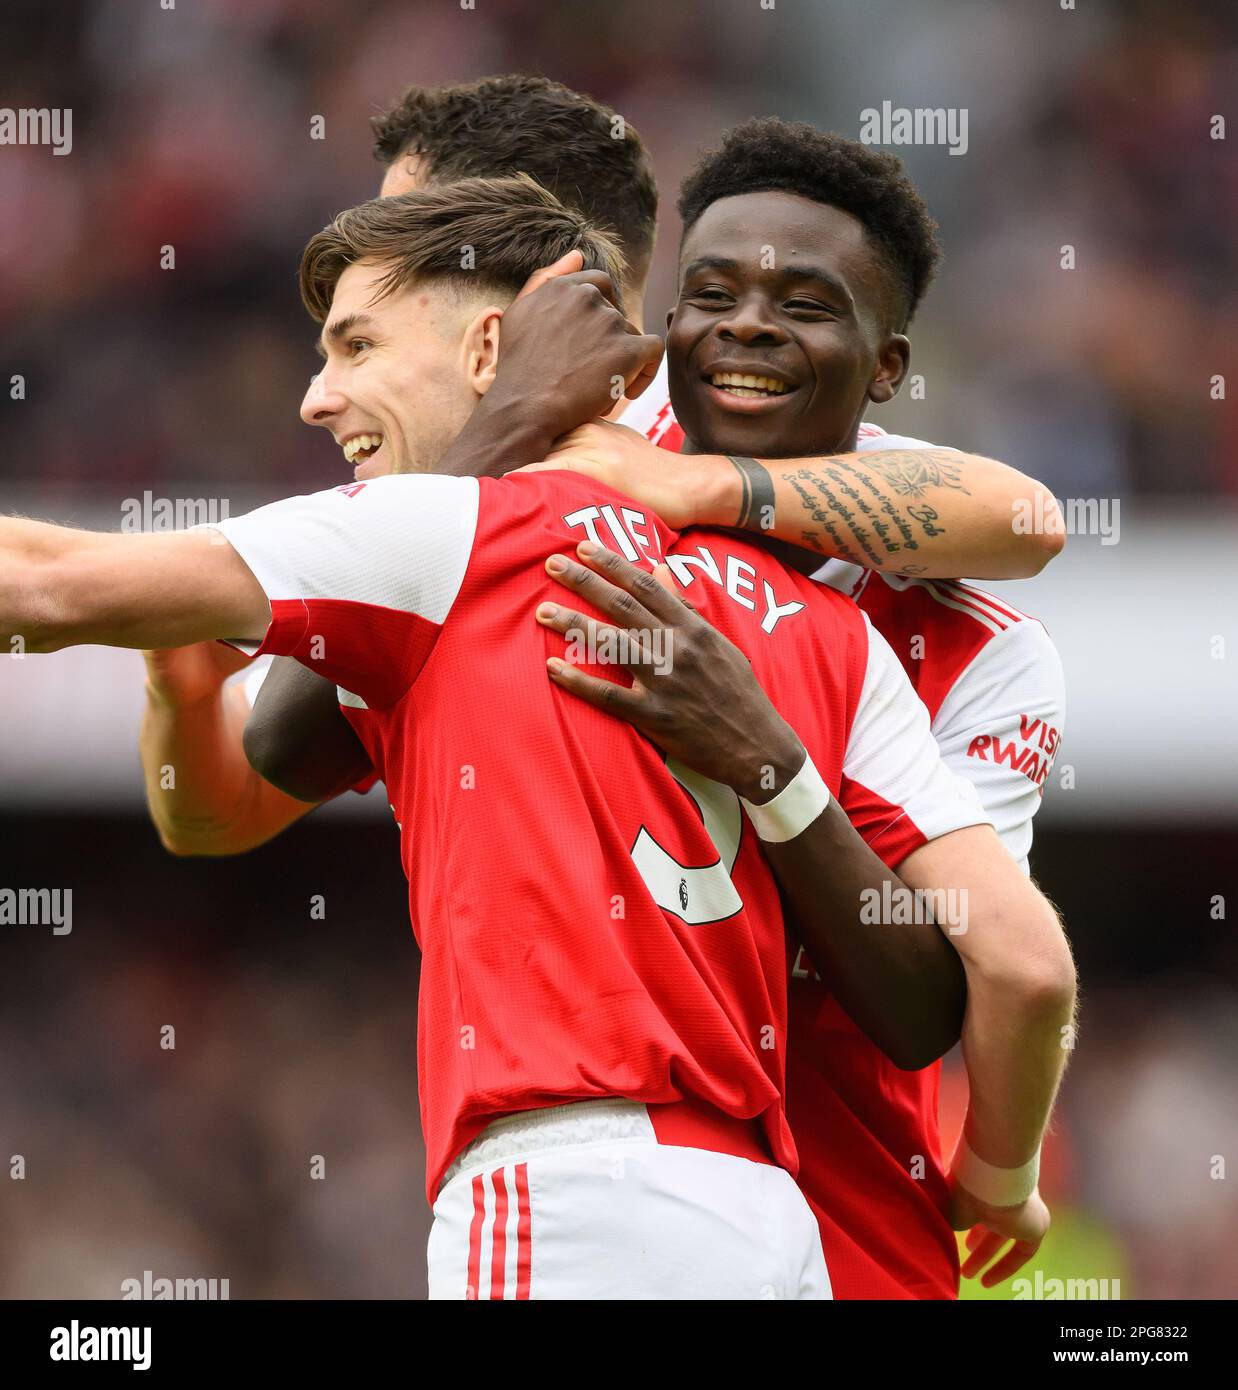 Kieran Tierney of Arsenal during the Premier League match between  Nottingham Forest and Arsenal at the City Ground, Nottingham on Saturday  20th May 2023. (Photo: Jon Hobley